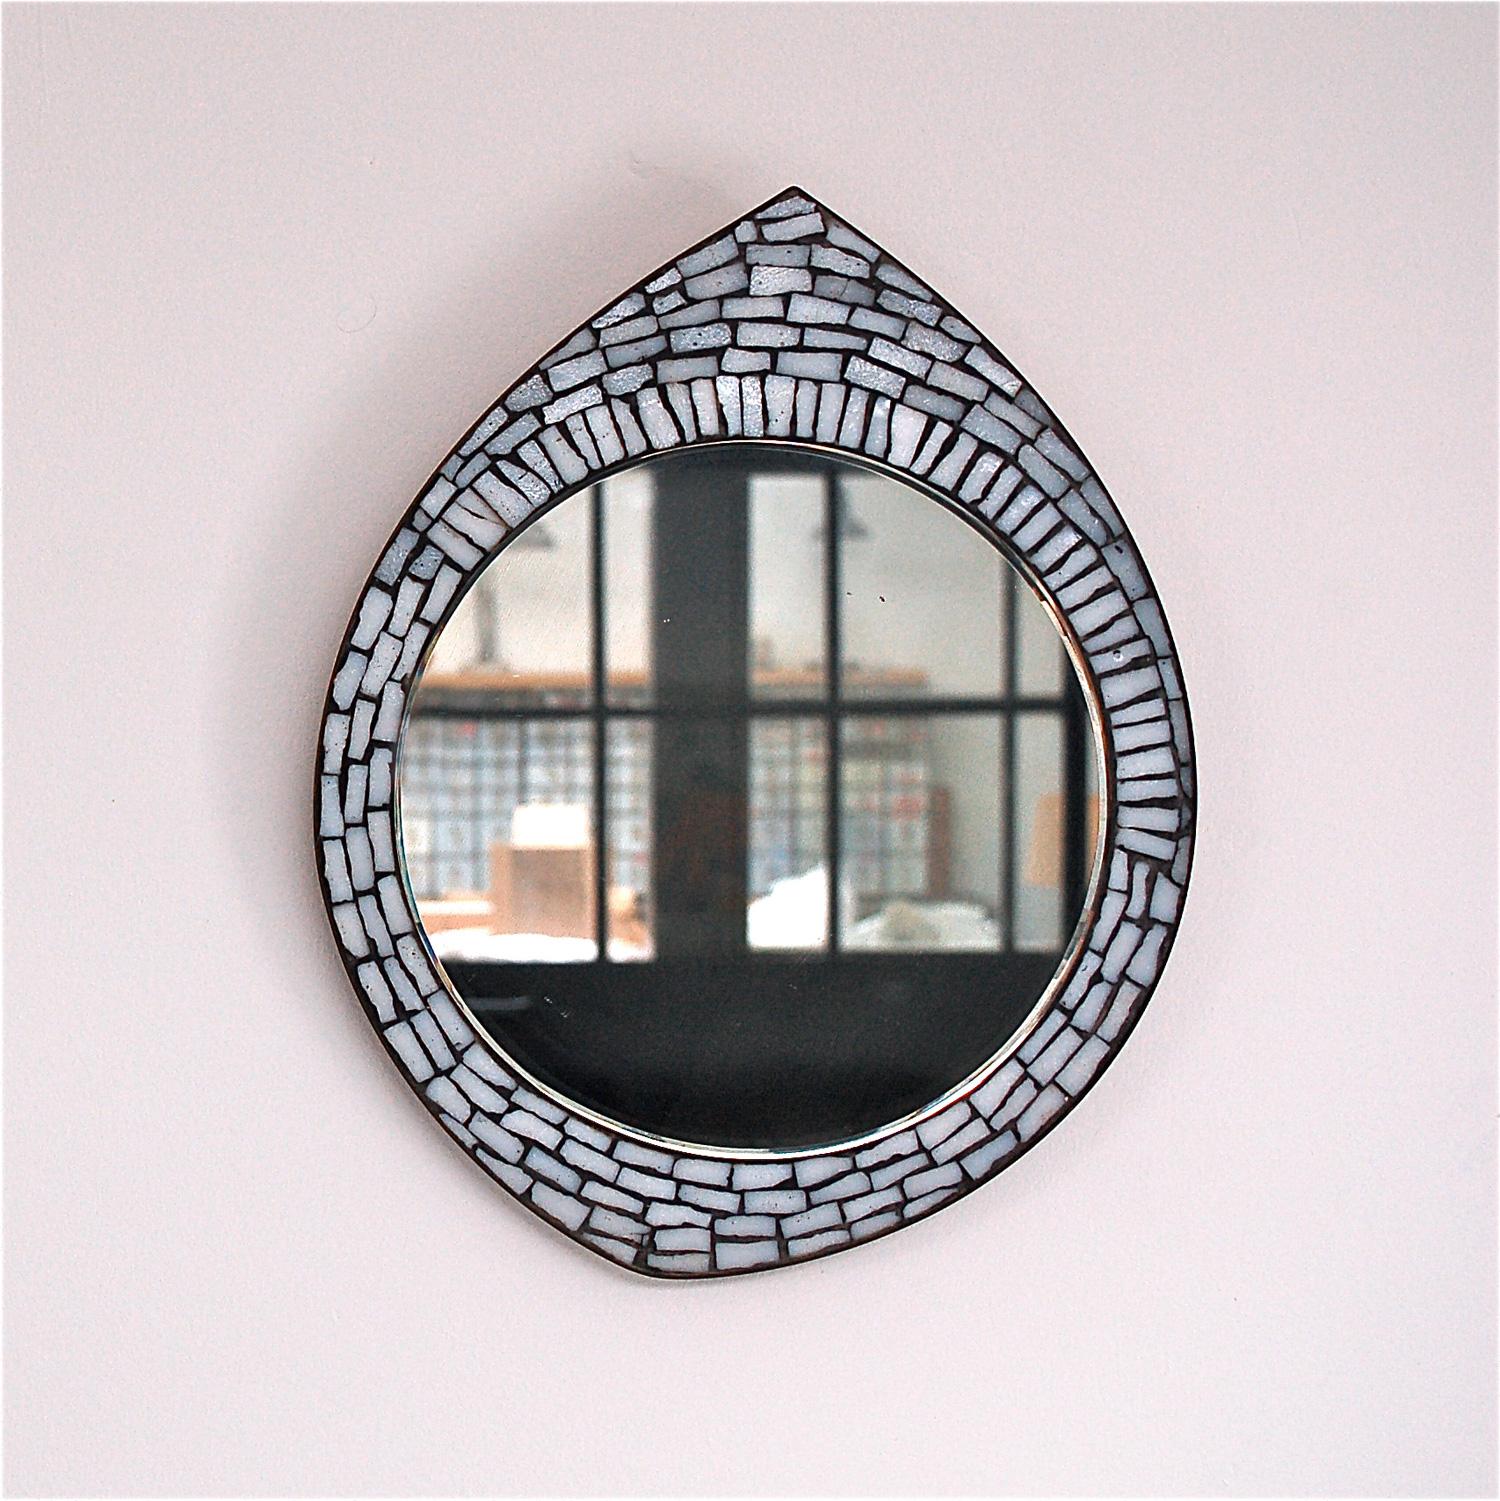 Midcentury white mosaic accent mirror in the style of Berthold Muller. The mirror has a shape that resembles a droplet, a tear drop. With the simple addition of an extra hook it can be hung horizontally to resemble an eye shape. Its dimensions are